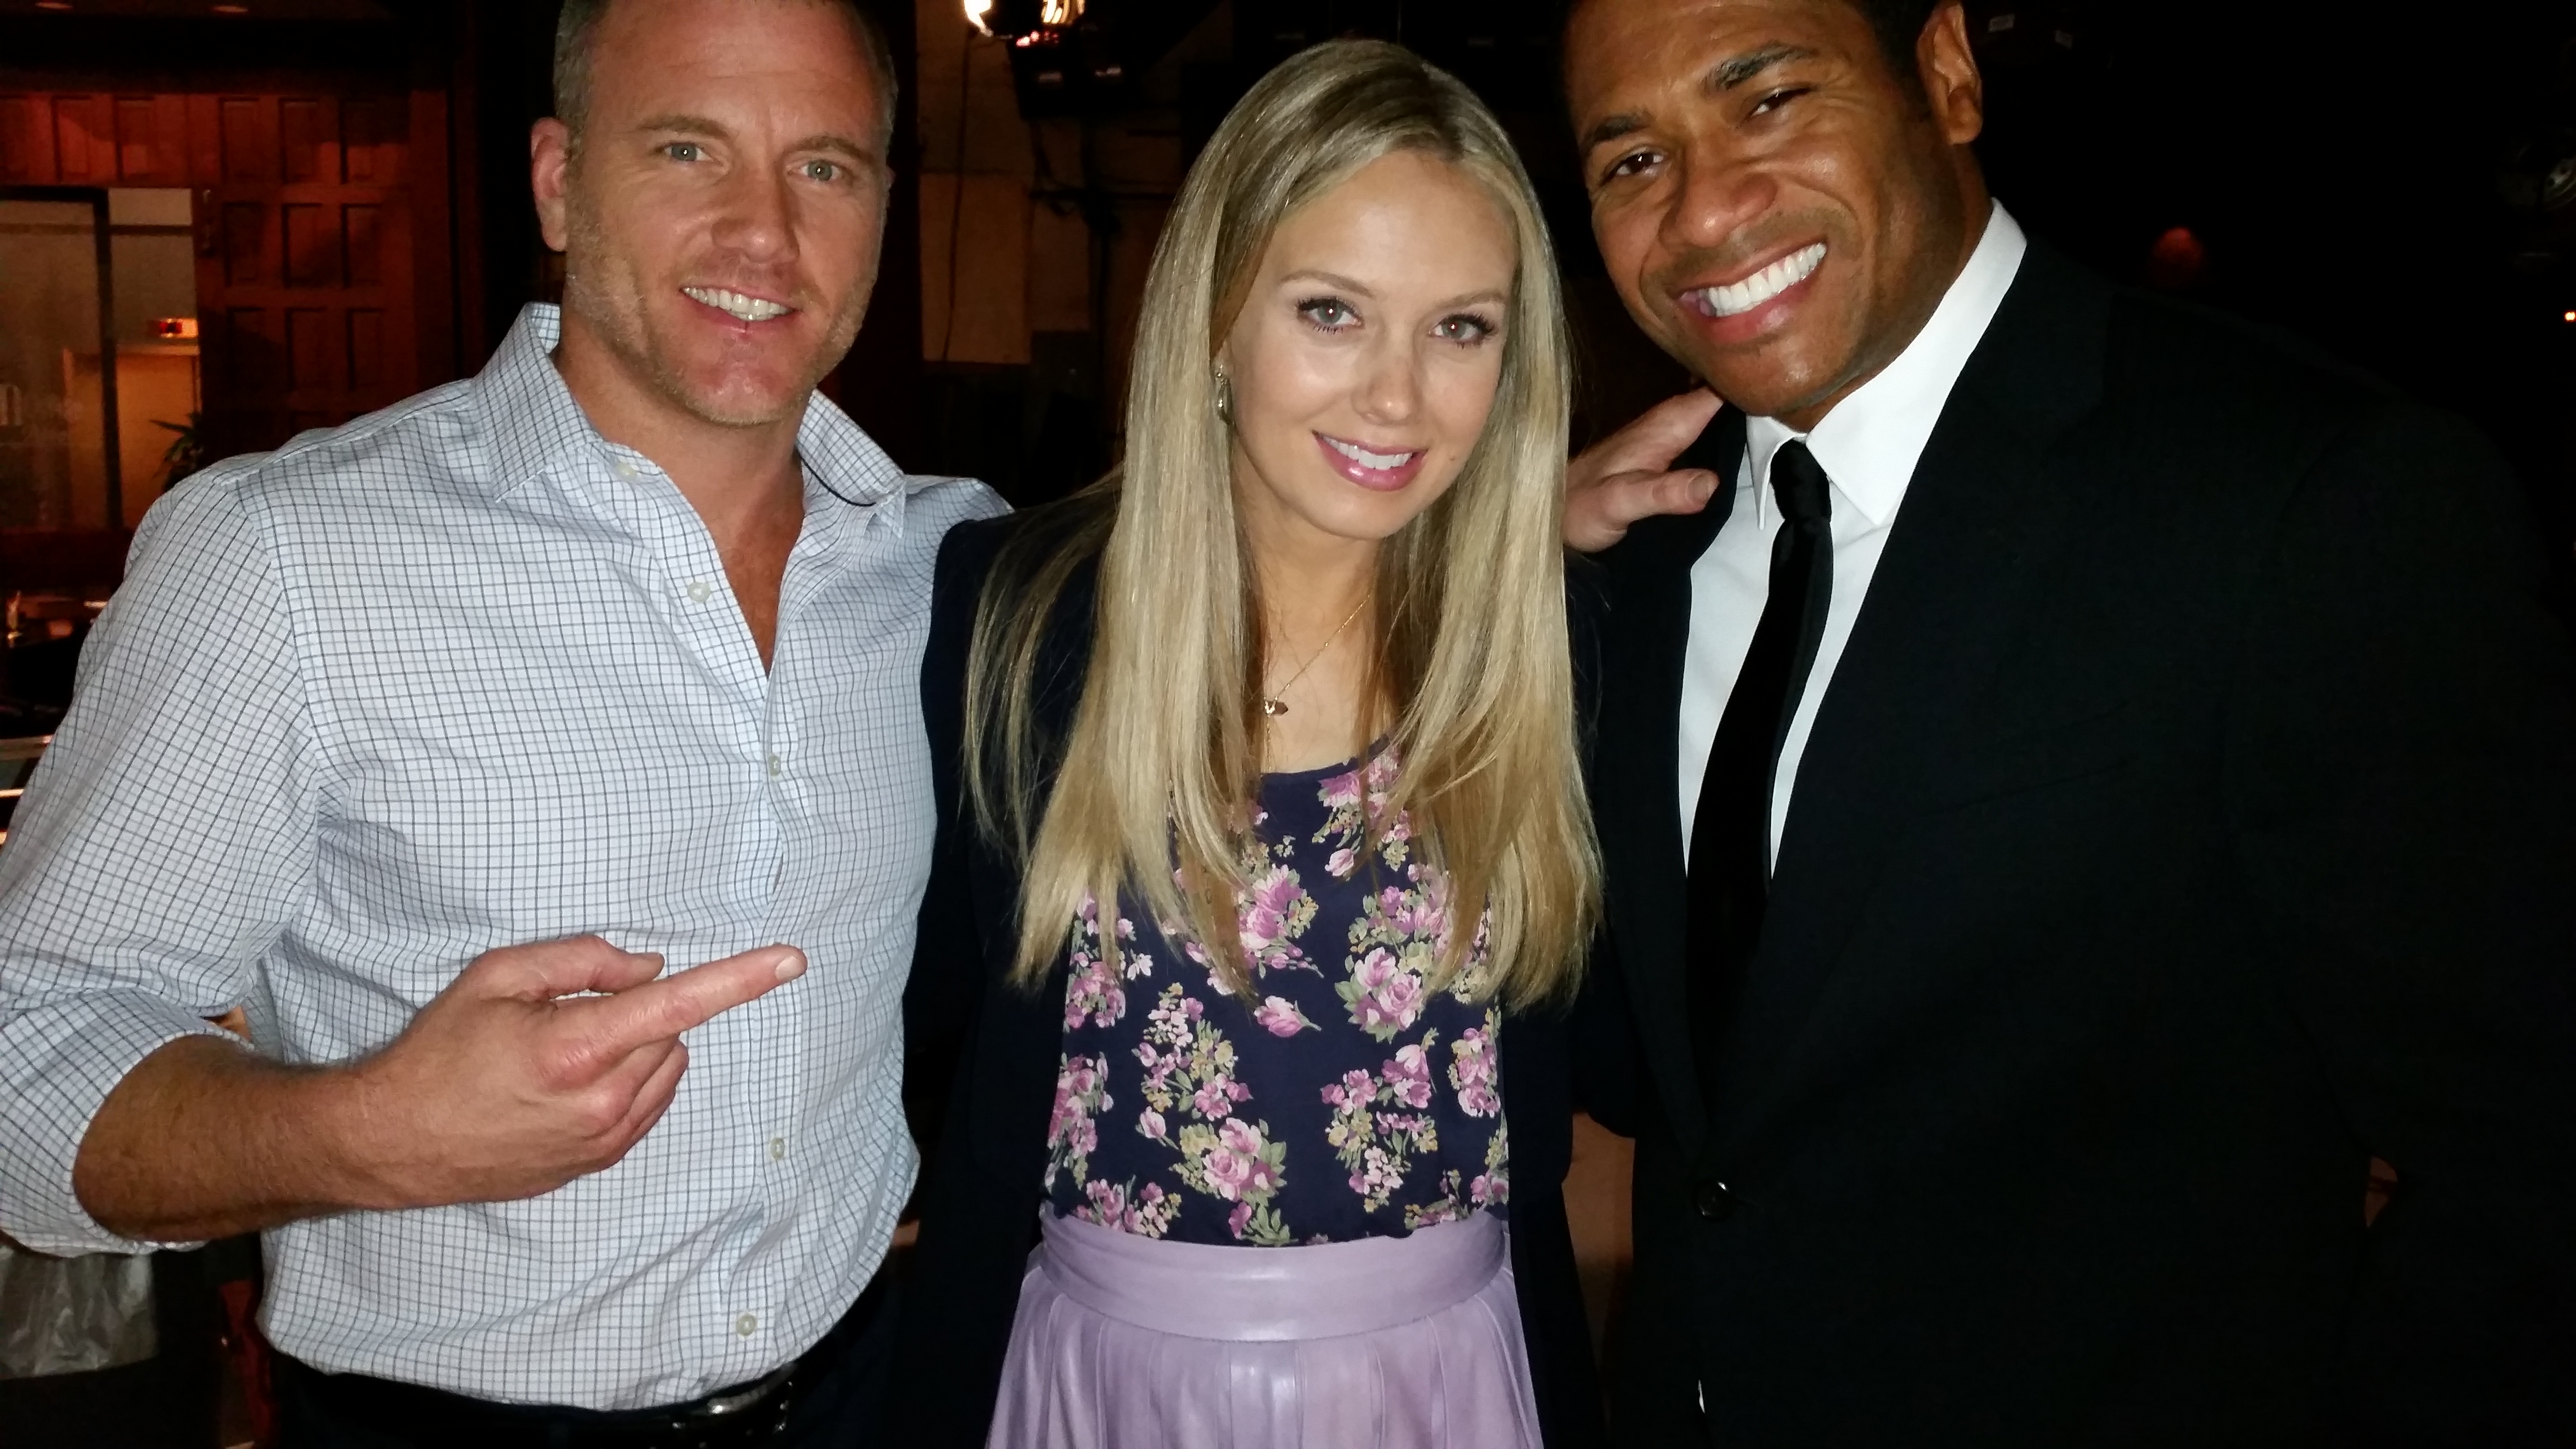 Sean Carrigan, Melissa Ordway and Mandell Frazier on set of CBS's 